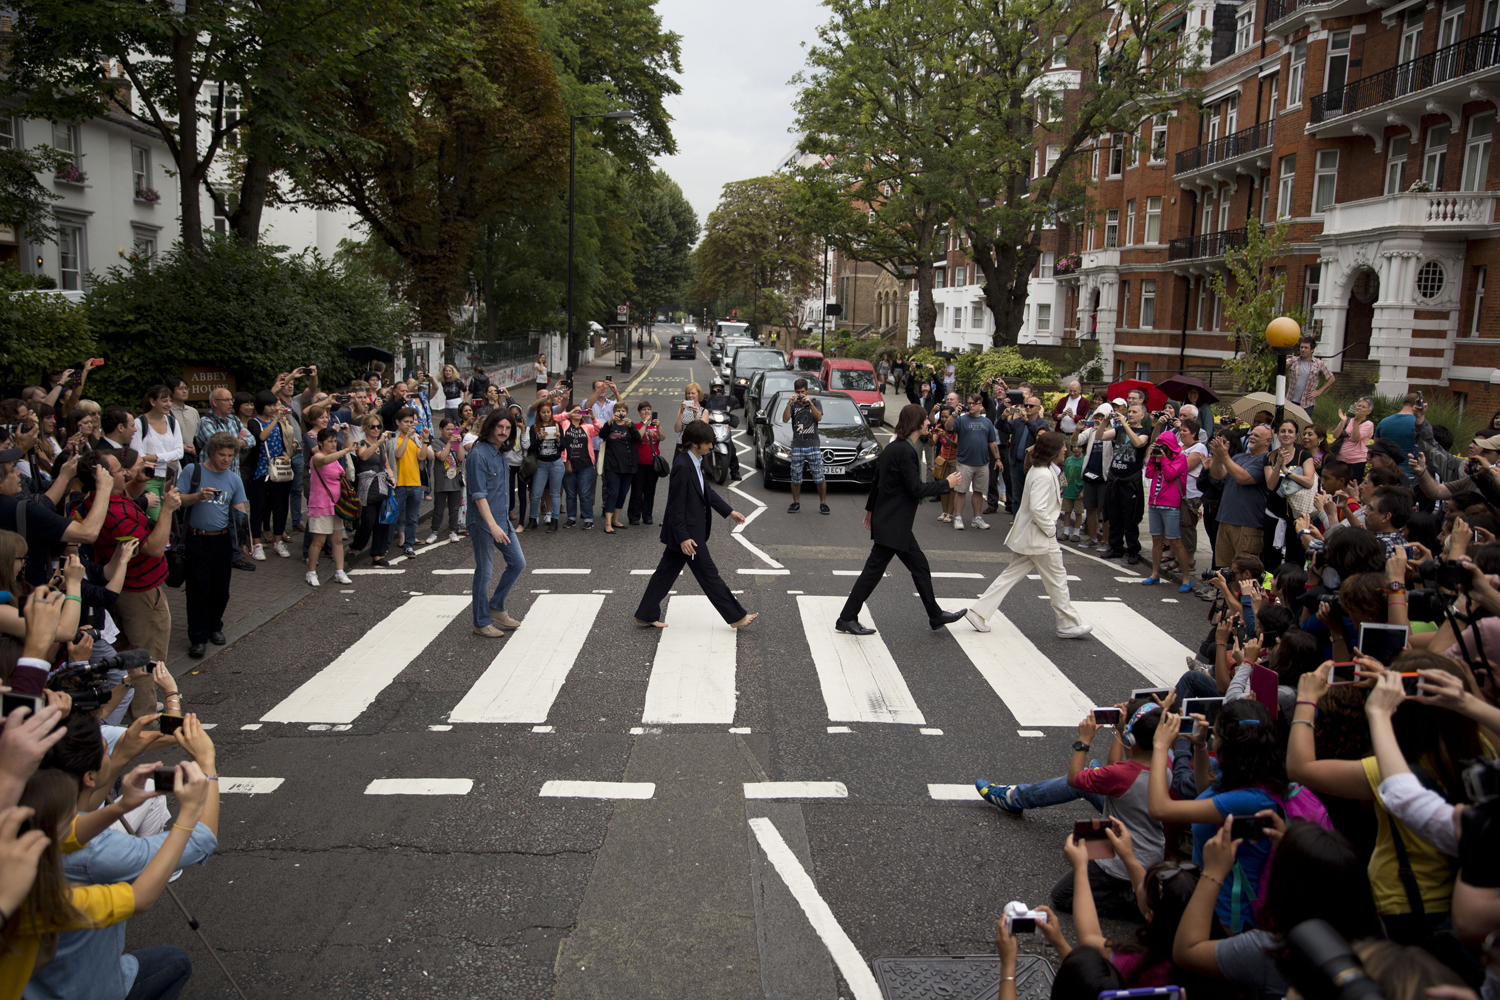 Aug. 8, 2014. The cast of the West End Beatles musical show "Let it Be" pose for photographers by attempting to recreate the cover photograph of the Beatles album "Abbey Road" on the zebra crossing on Abbey Road in London.